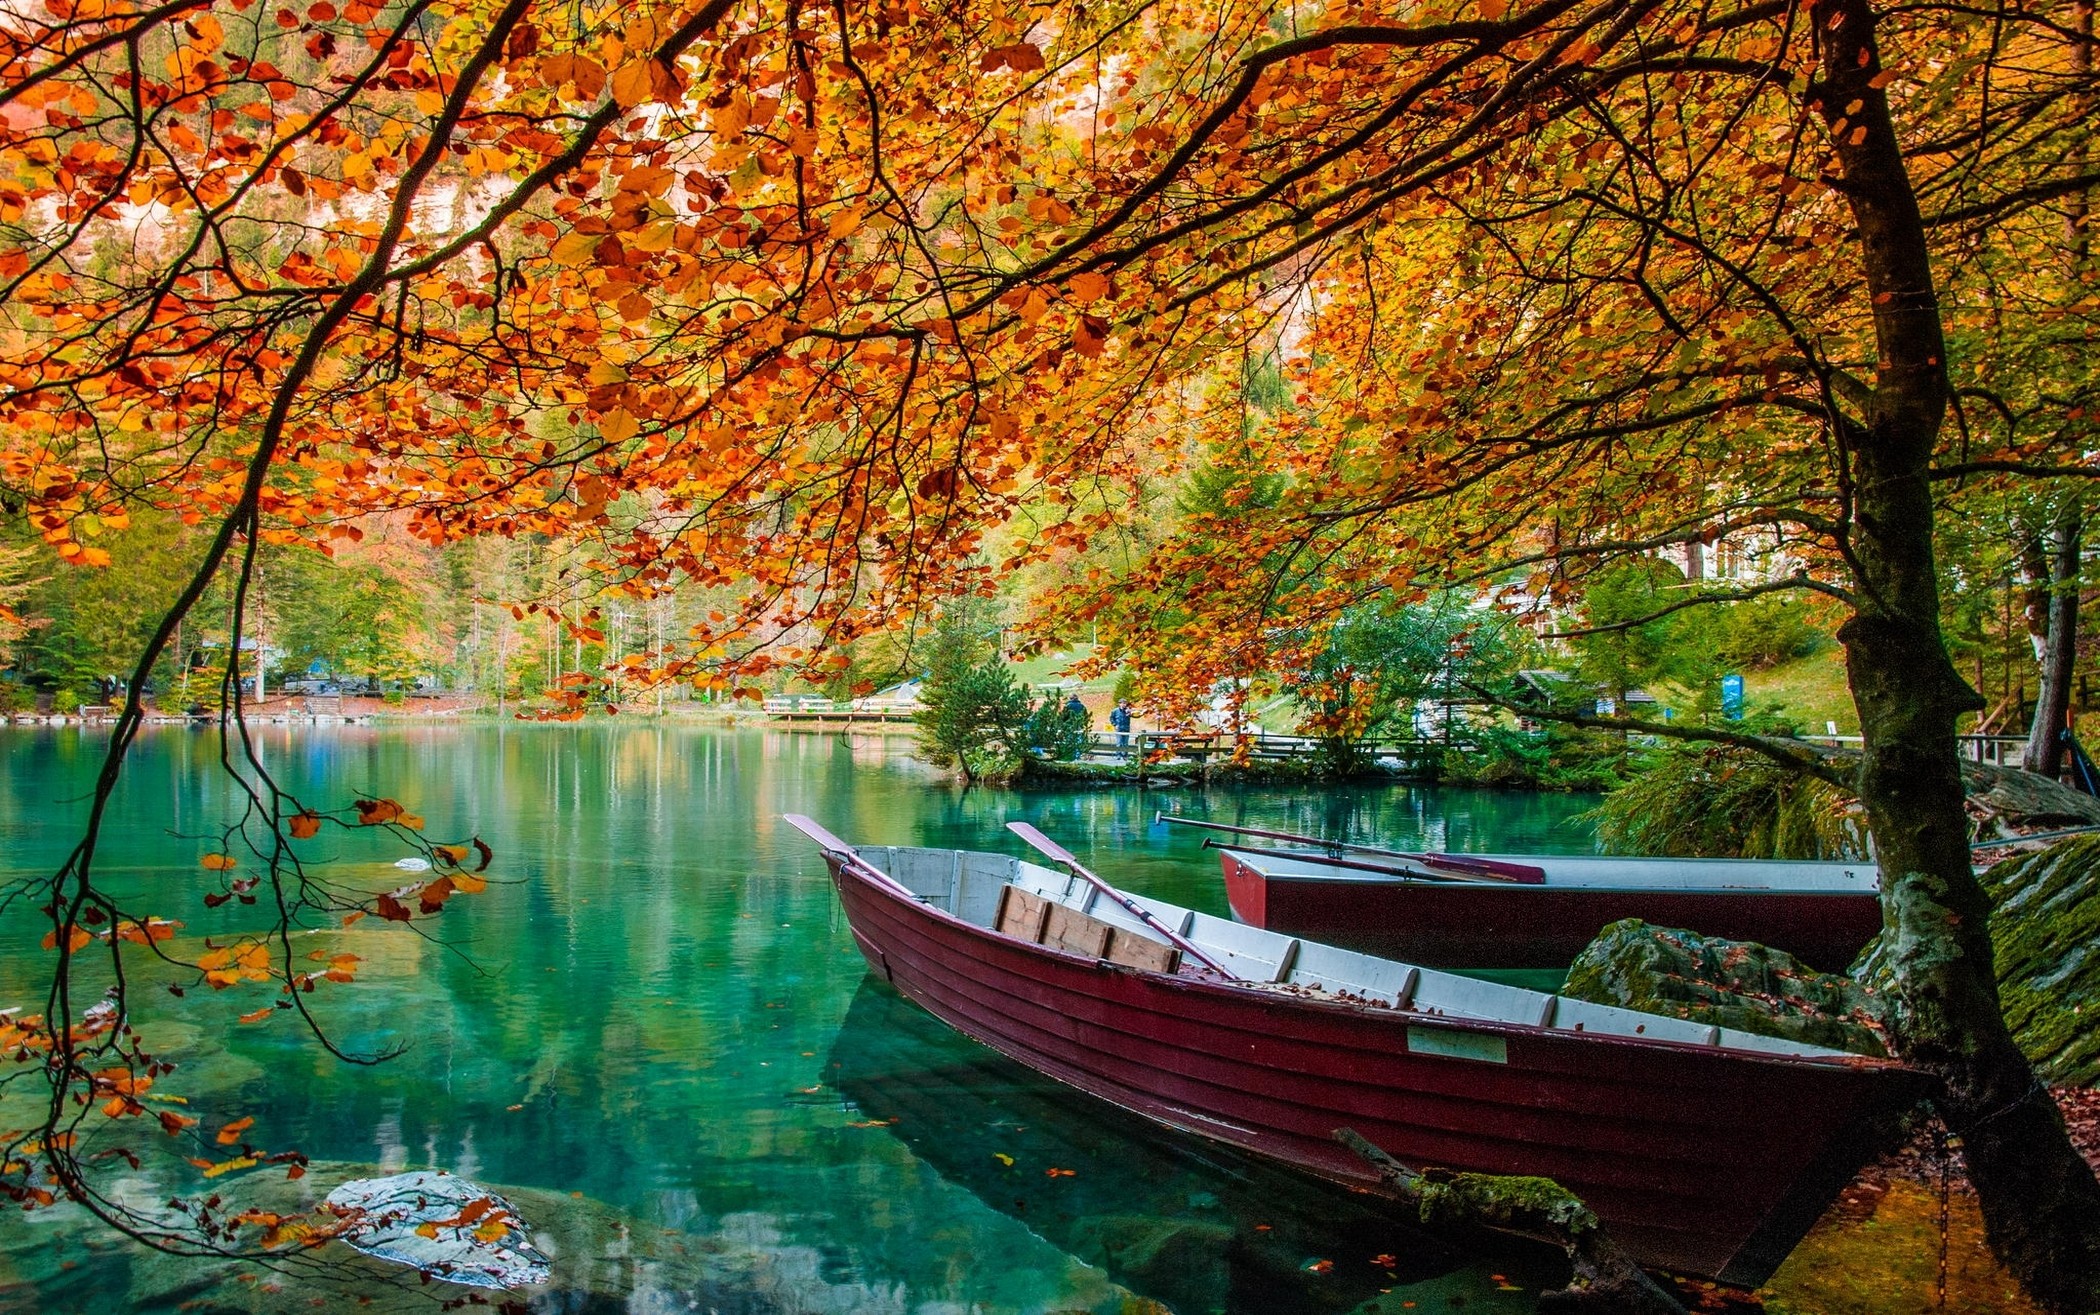 General 2100x1315 nature landscape lake trees boat leaves fall green water